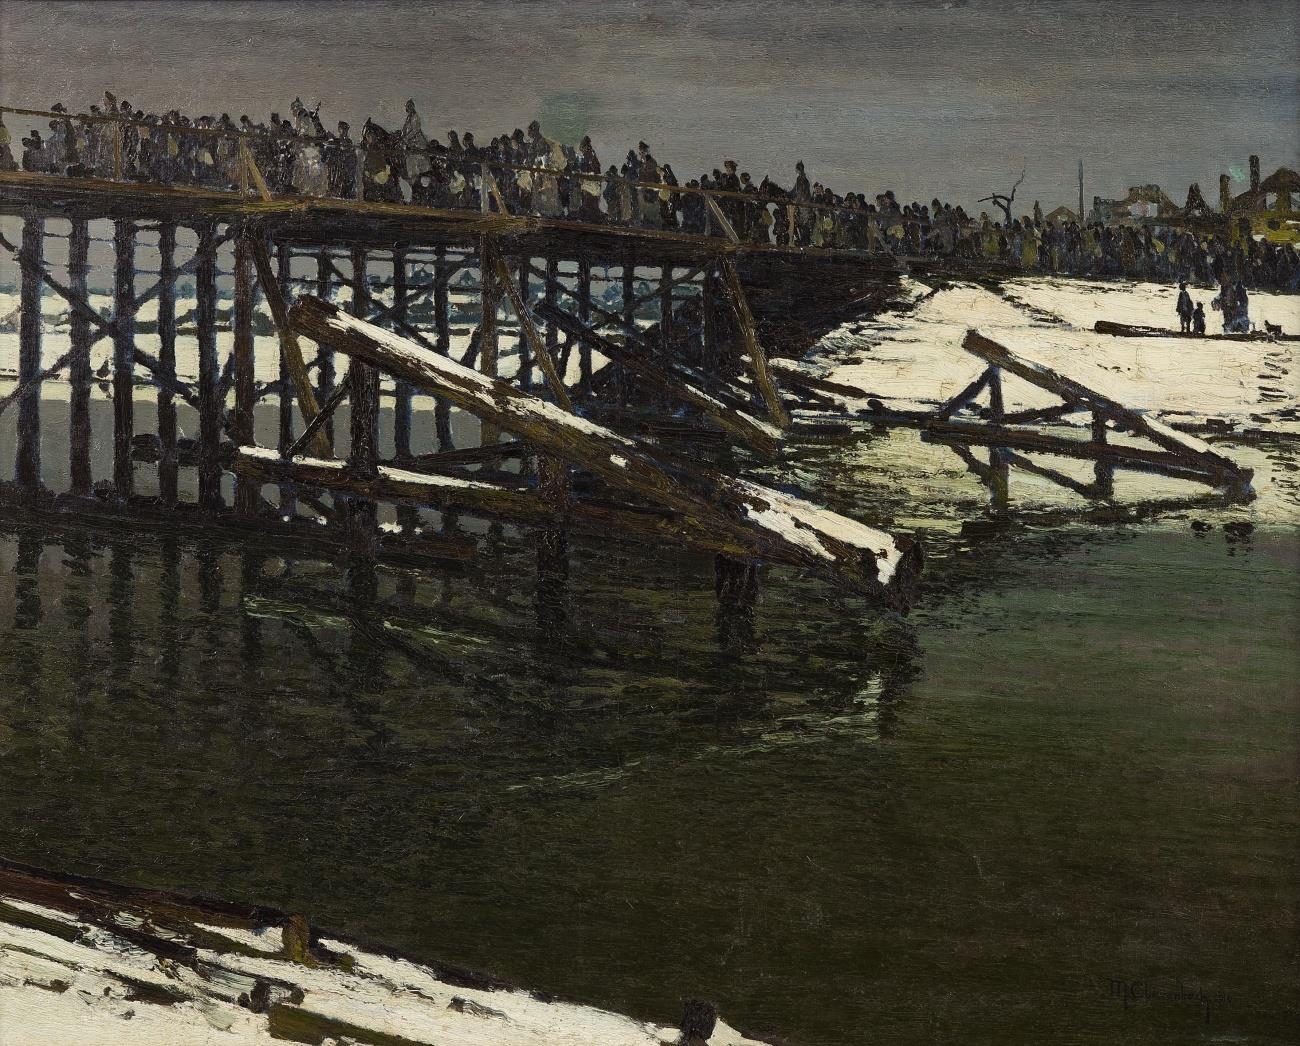 Soldiers on a Temporary Bridge near Slomin by Max Clarenbach